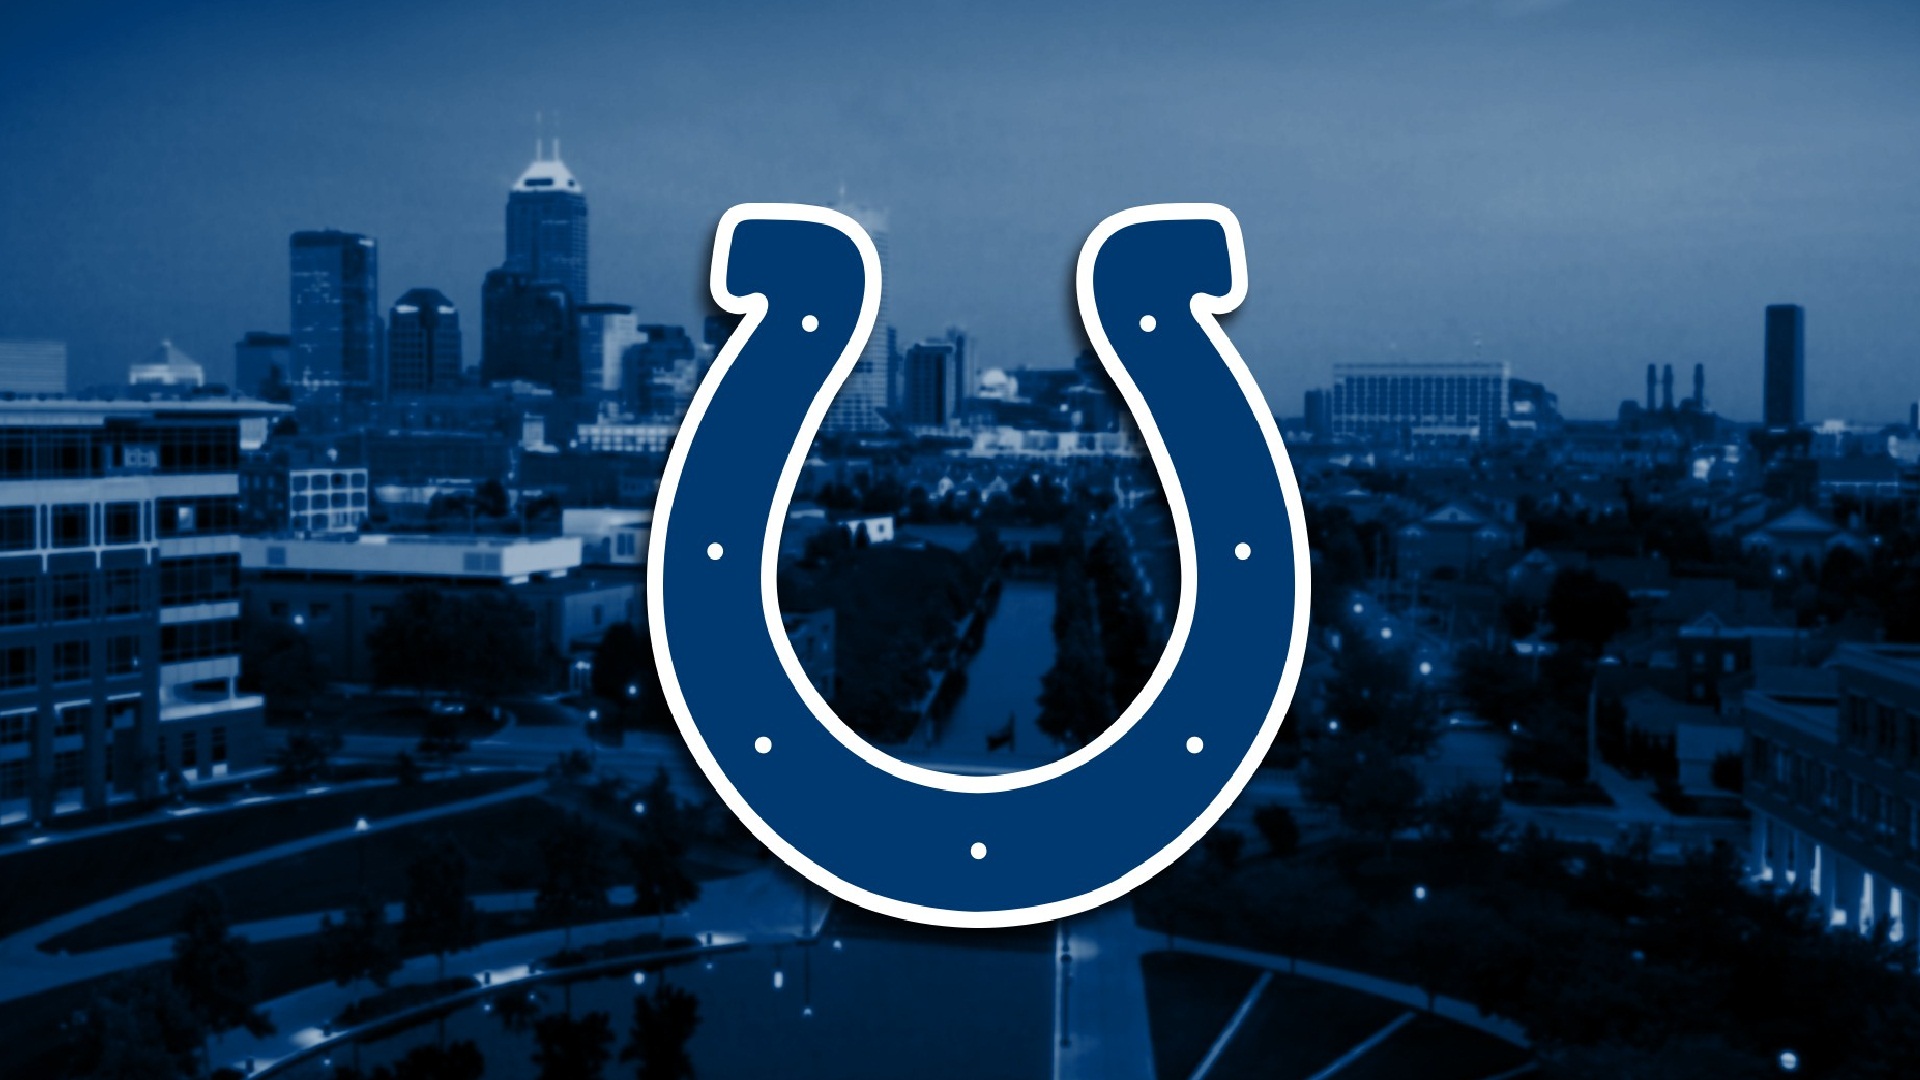 Wallpapers Indianapolis Colts NFL with resolution 1920x1080 pixel. You can make this wallpaper for your Mac or Windows Desktop Background, iPhone, Android or Tablet and another Smartphone device